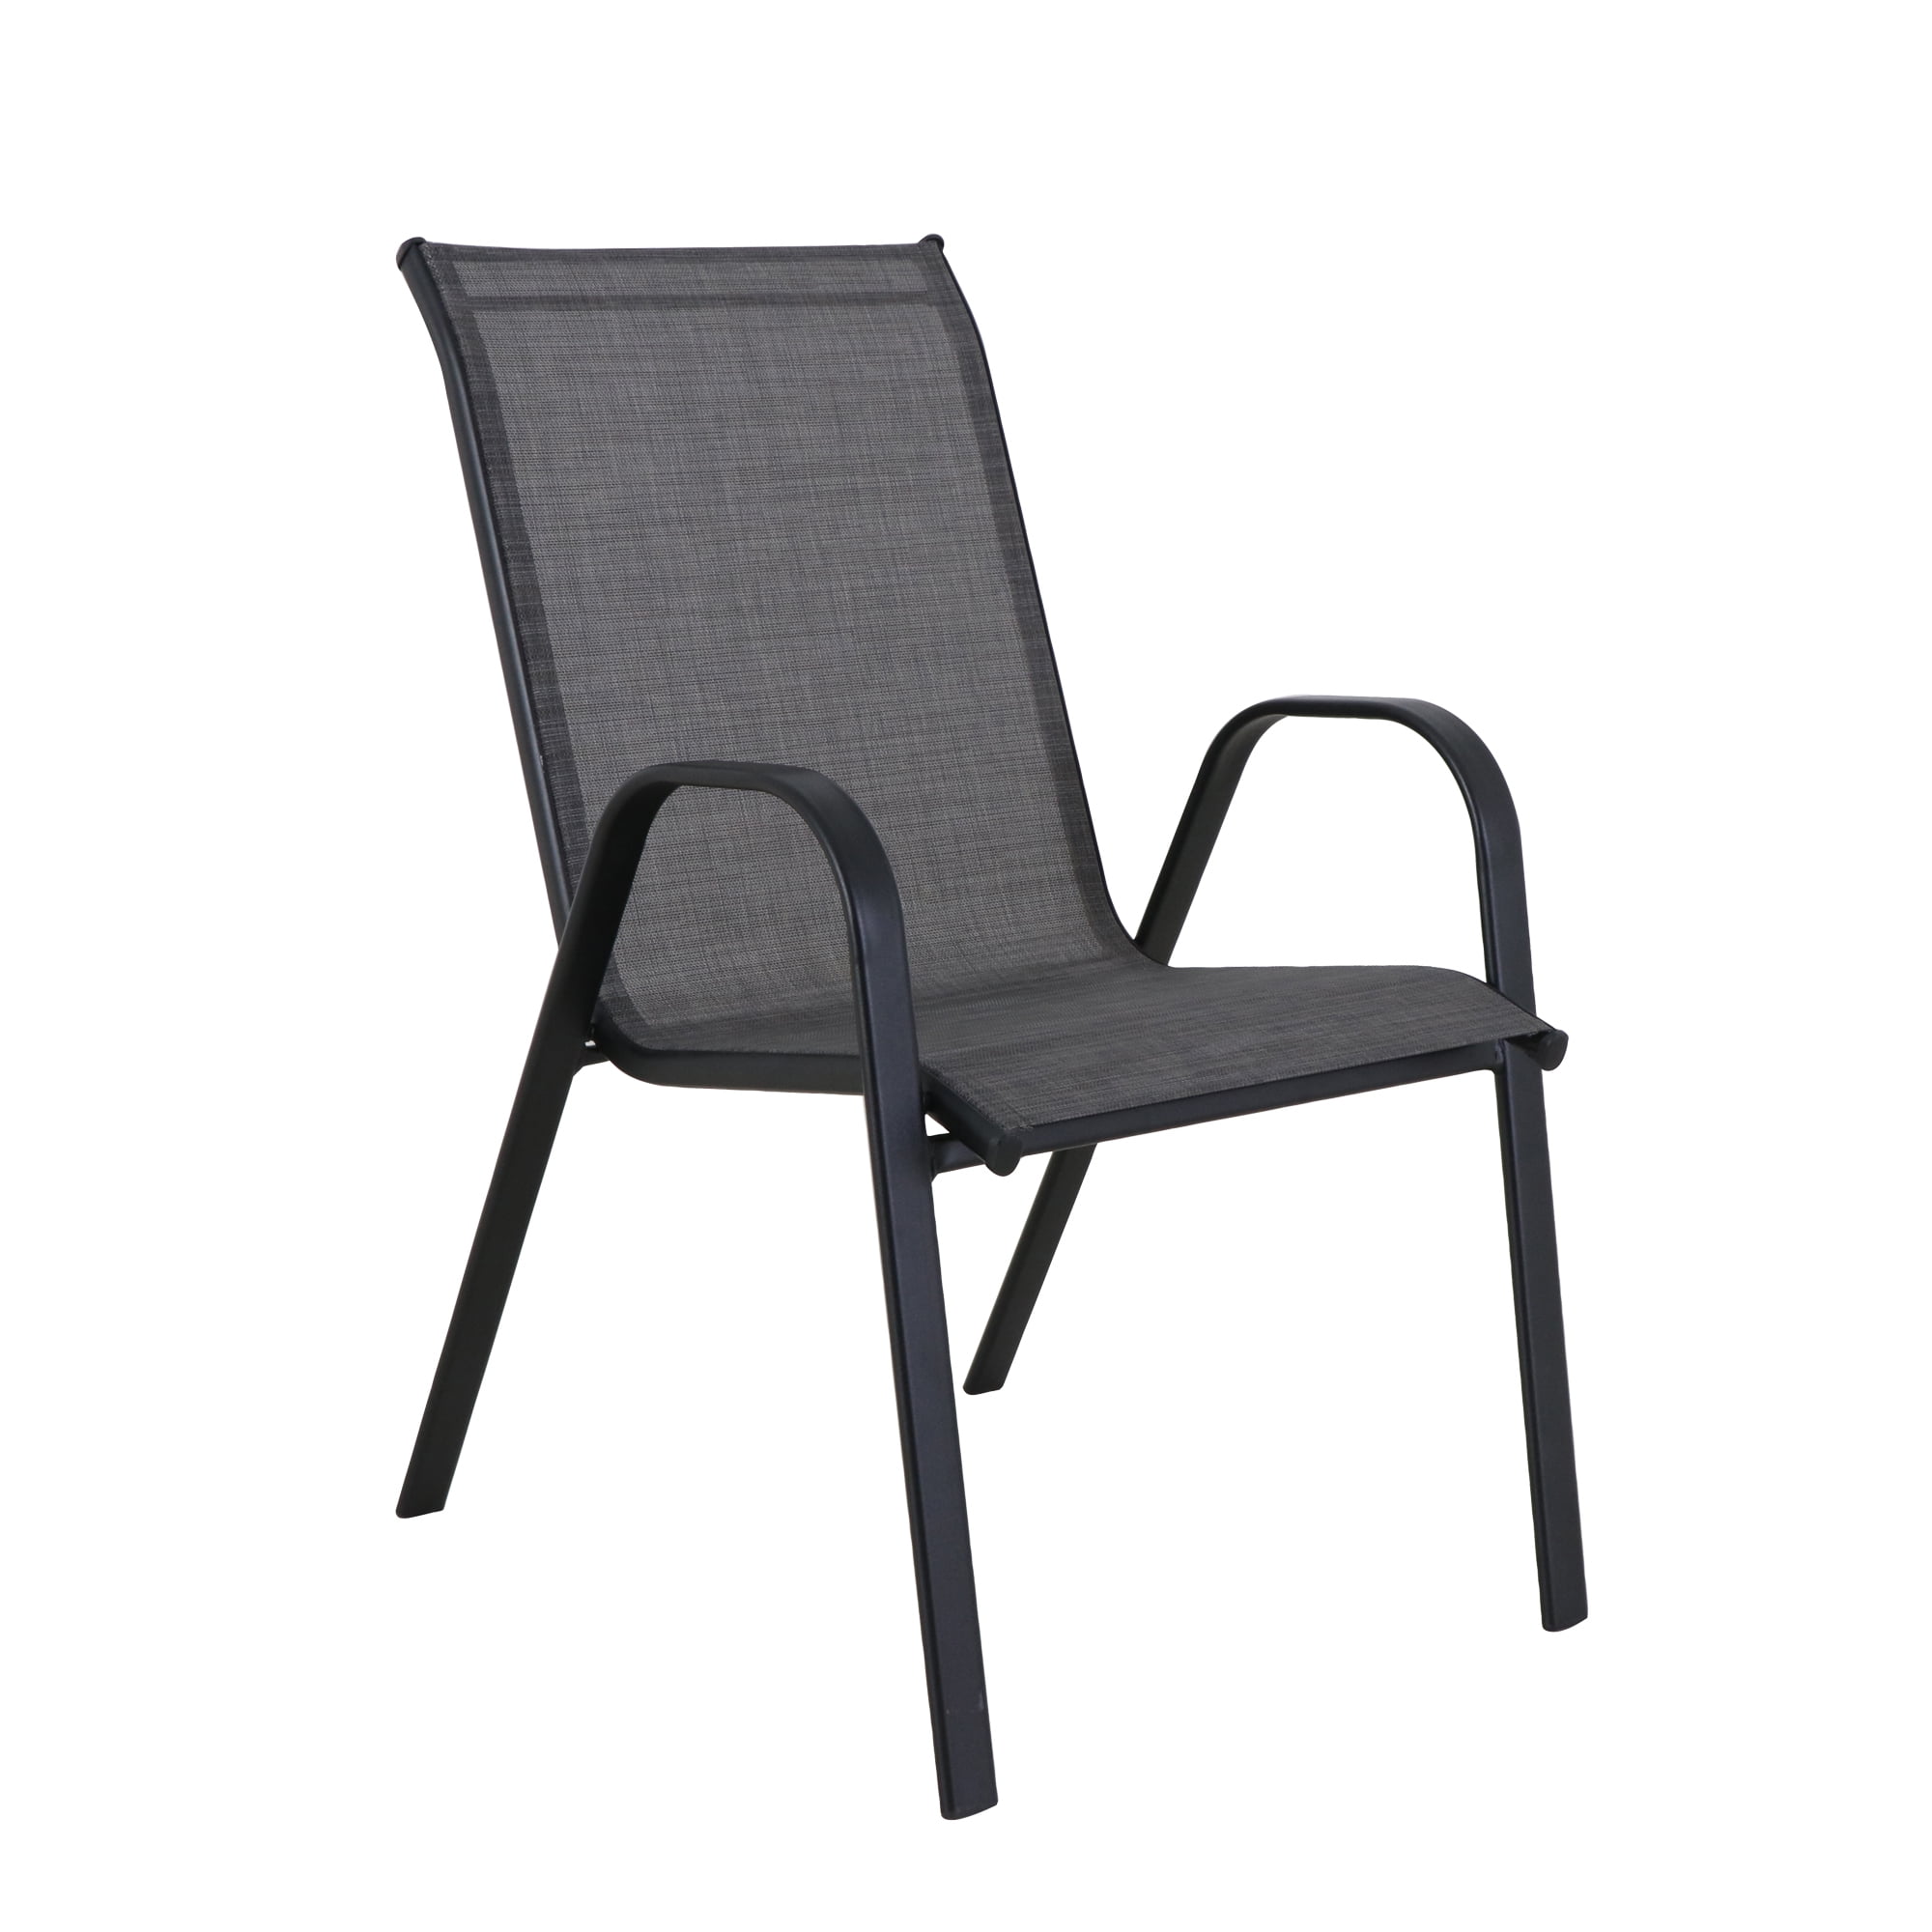 Mainstays Heritage Patio Steel Stacking Chair, Black Frame with Grey